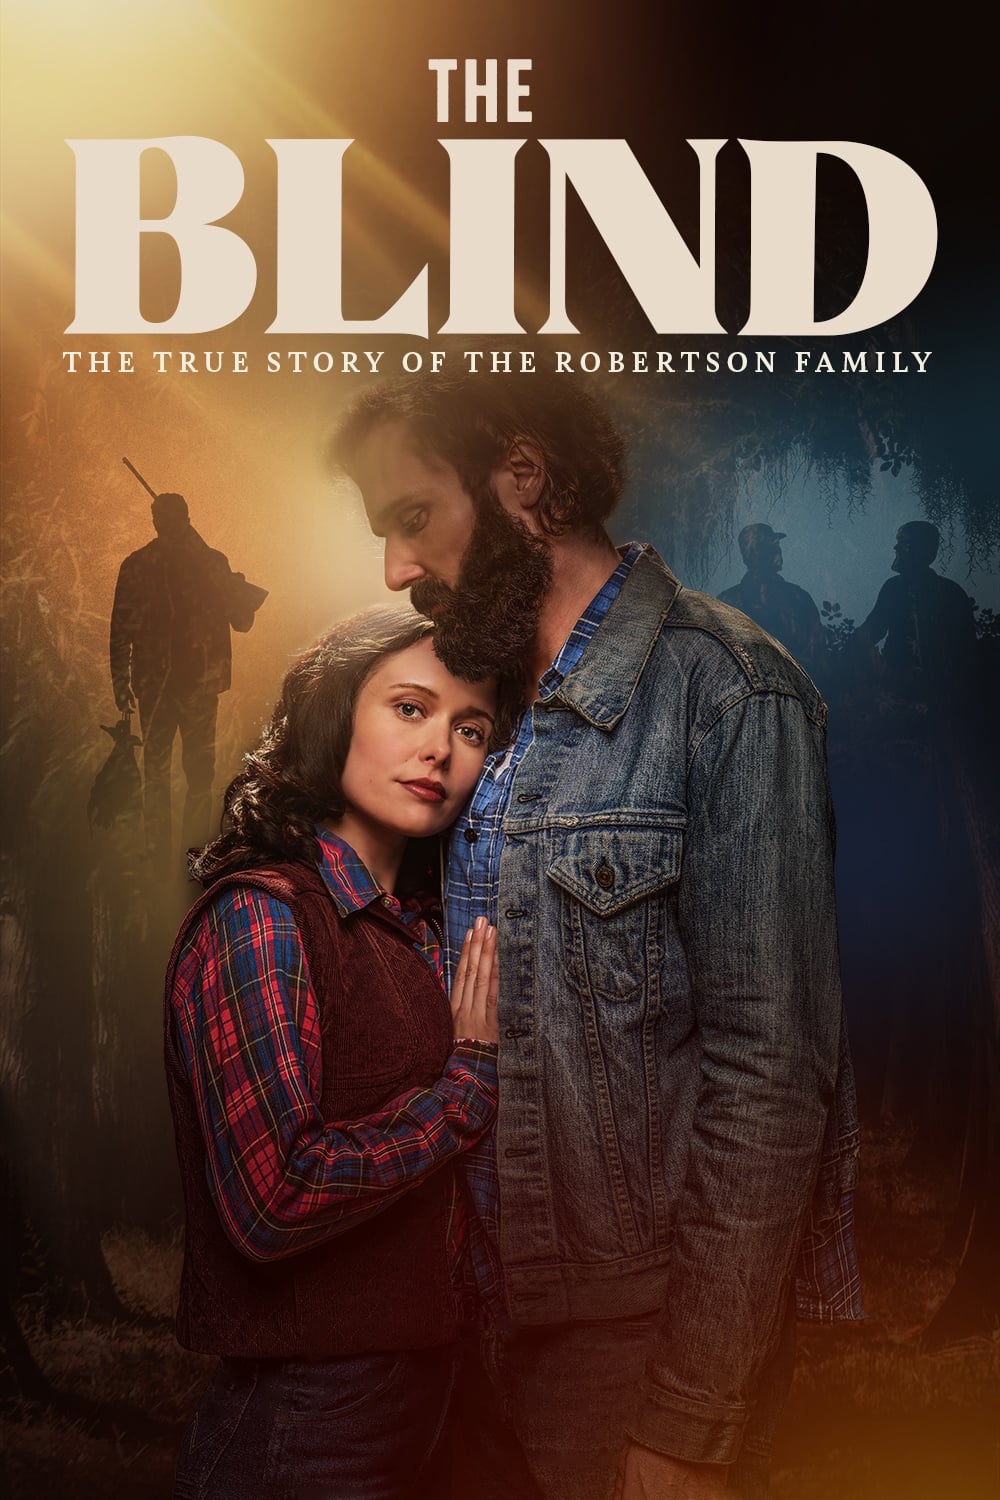 Poster for the movie "The Blind"